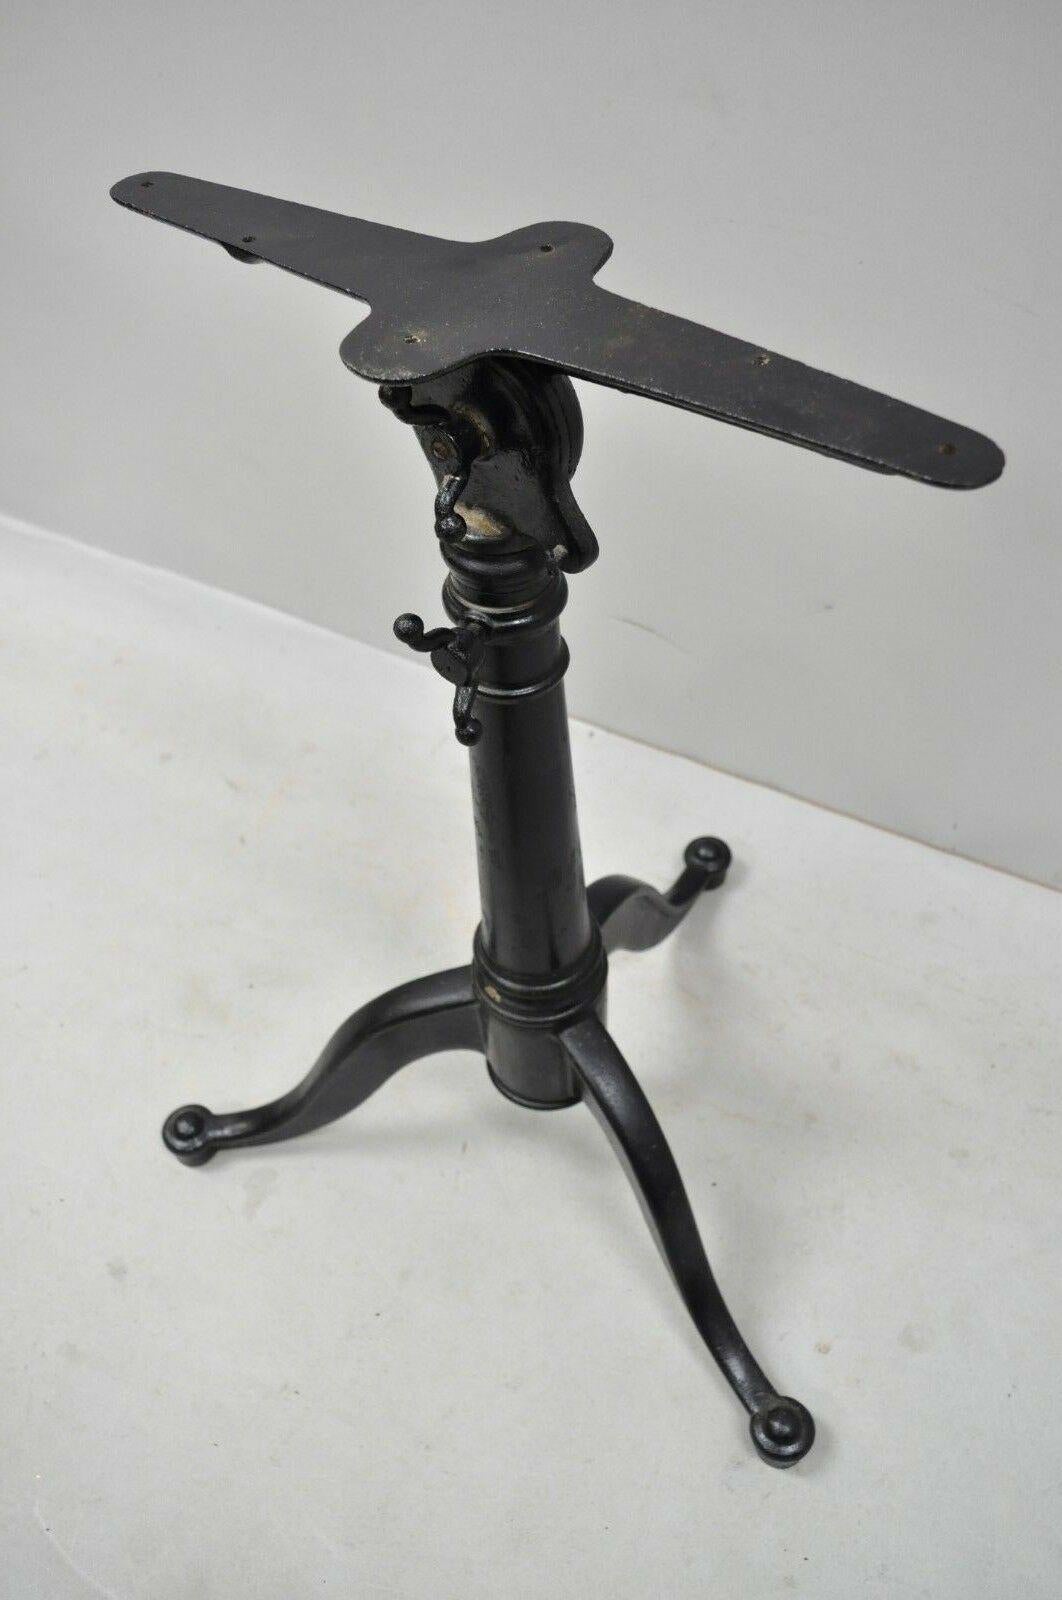 Eugene Dietzen cast iron small drafting work desk tripod base. Listing is for base only. Heavy cast iron construction, adjustable height and tilt head, circa early 20th century. Measurements: 28 - 41